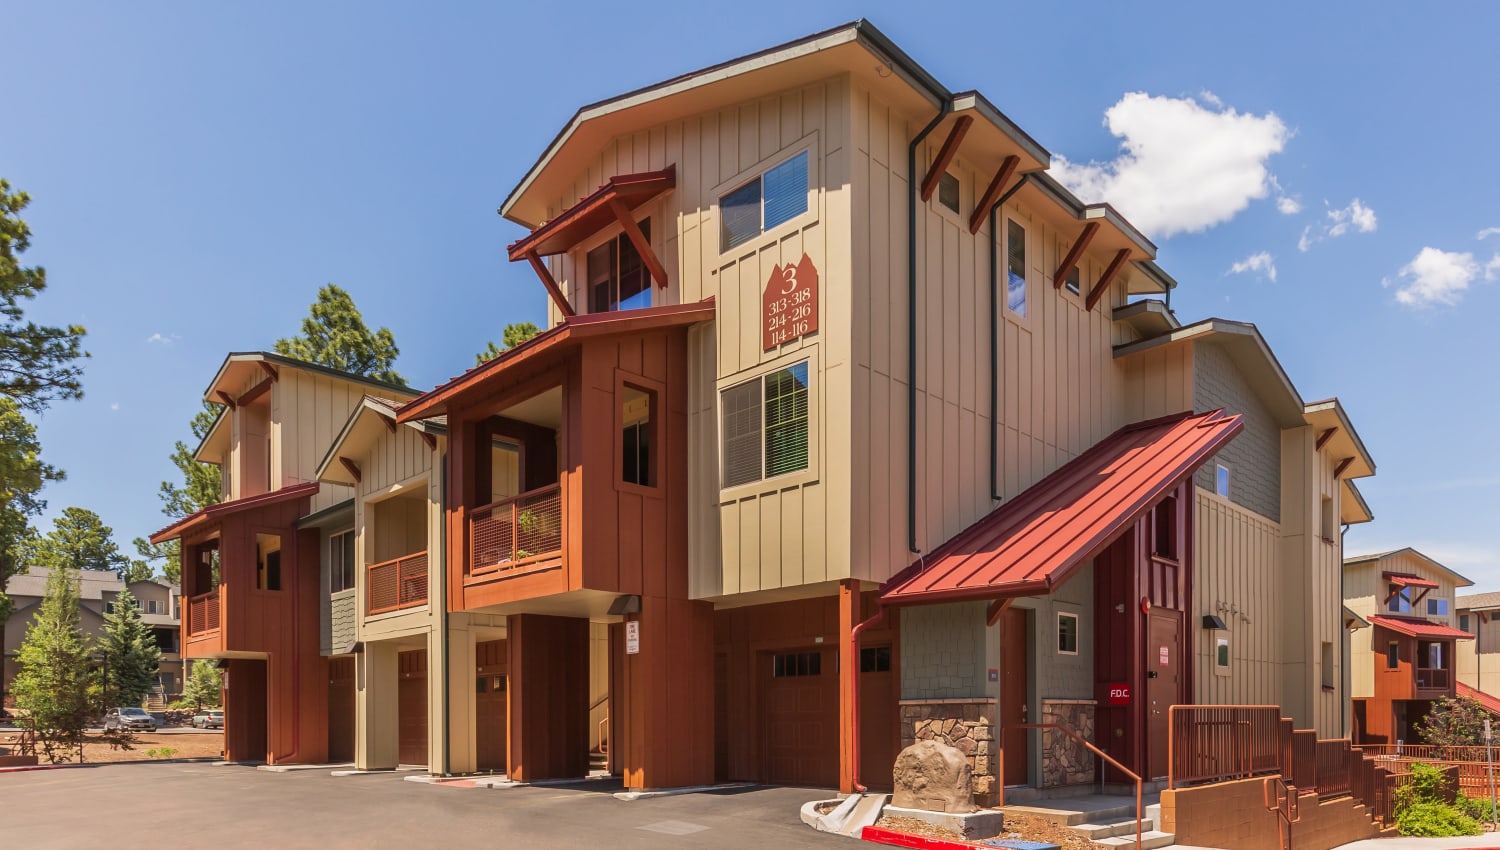 Exterior view of our luxury community at Mountain Trail in Flagstaff, Arizona